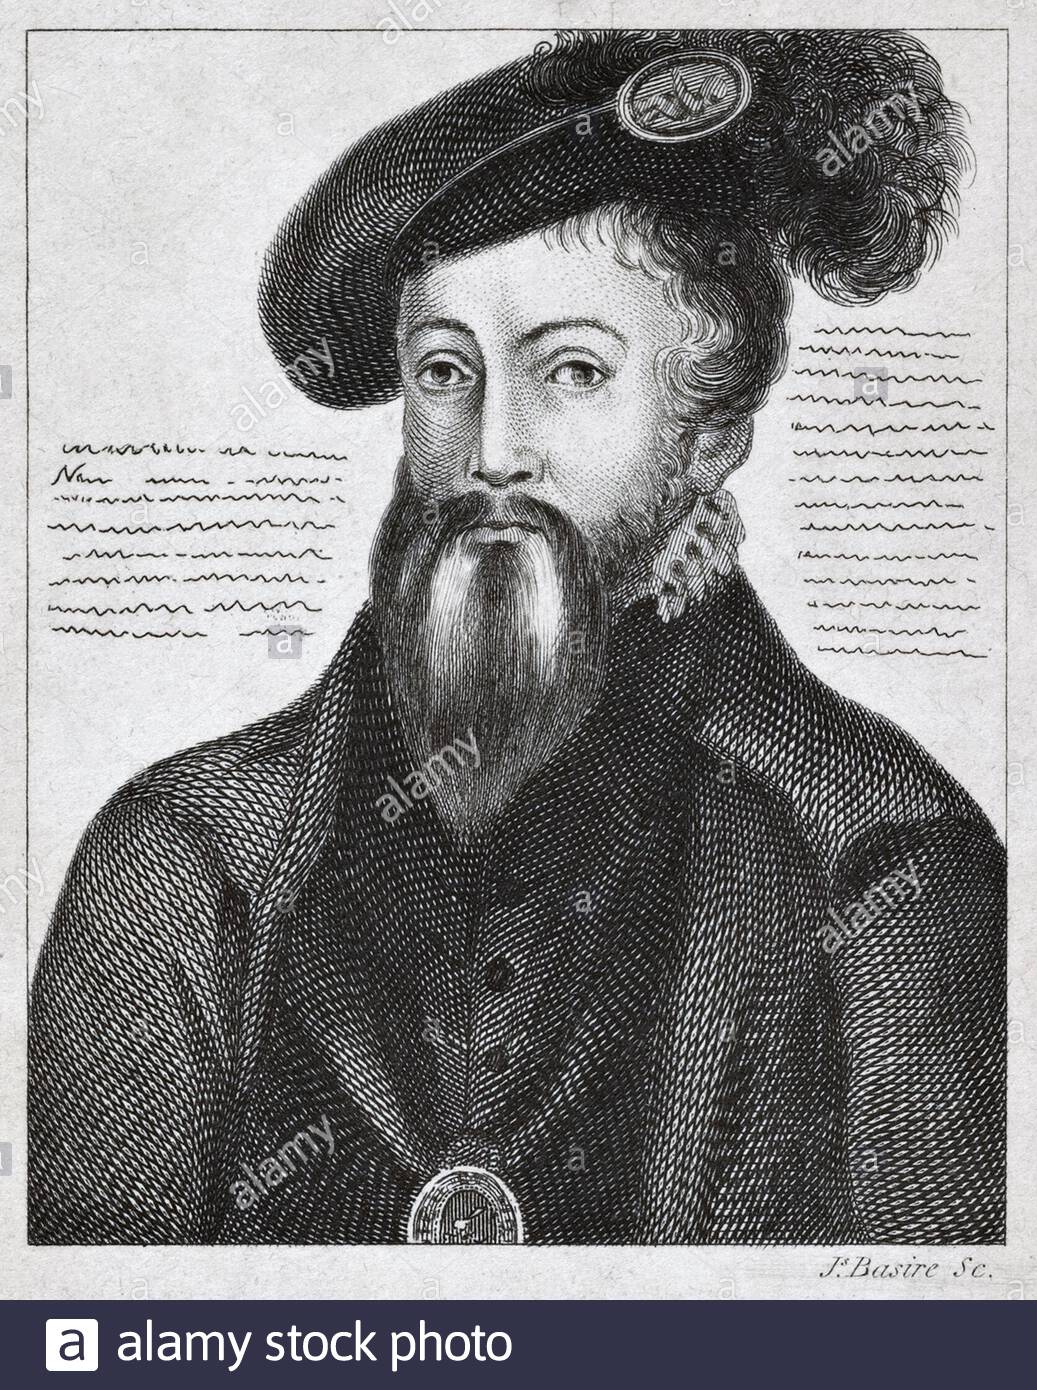 Edward Seymour portrait, 1st Duke of Somerset, 1500 – 1552, was the eldest surviving brother of Queen Jane Seymour, the third wife of King Henry VIII, he was the Lord Protector of England during the reign of King Edward VI, vintage illustration from 1805 Stock Photo